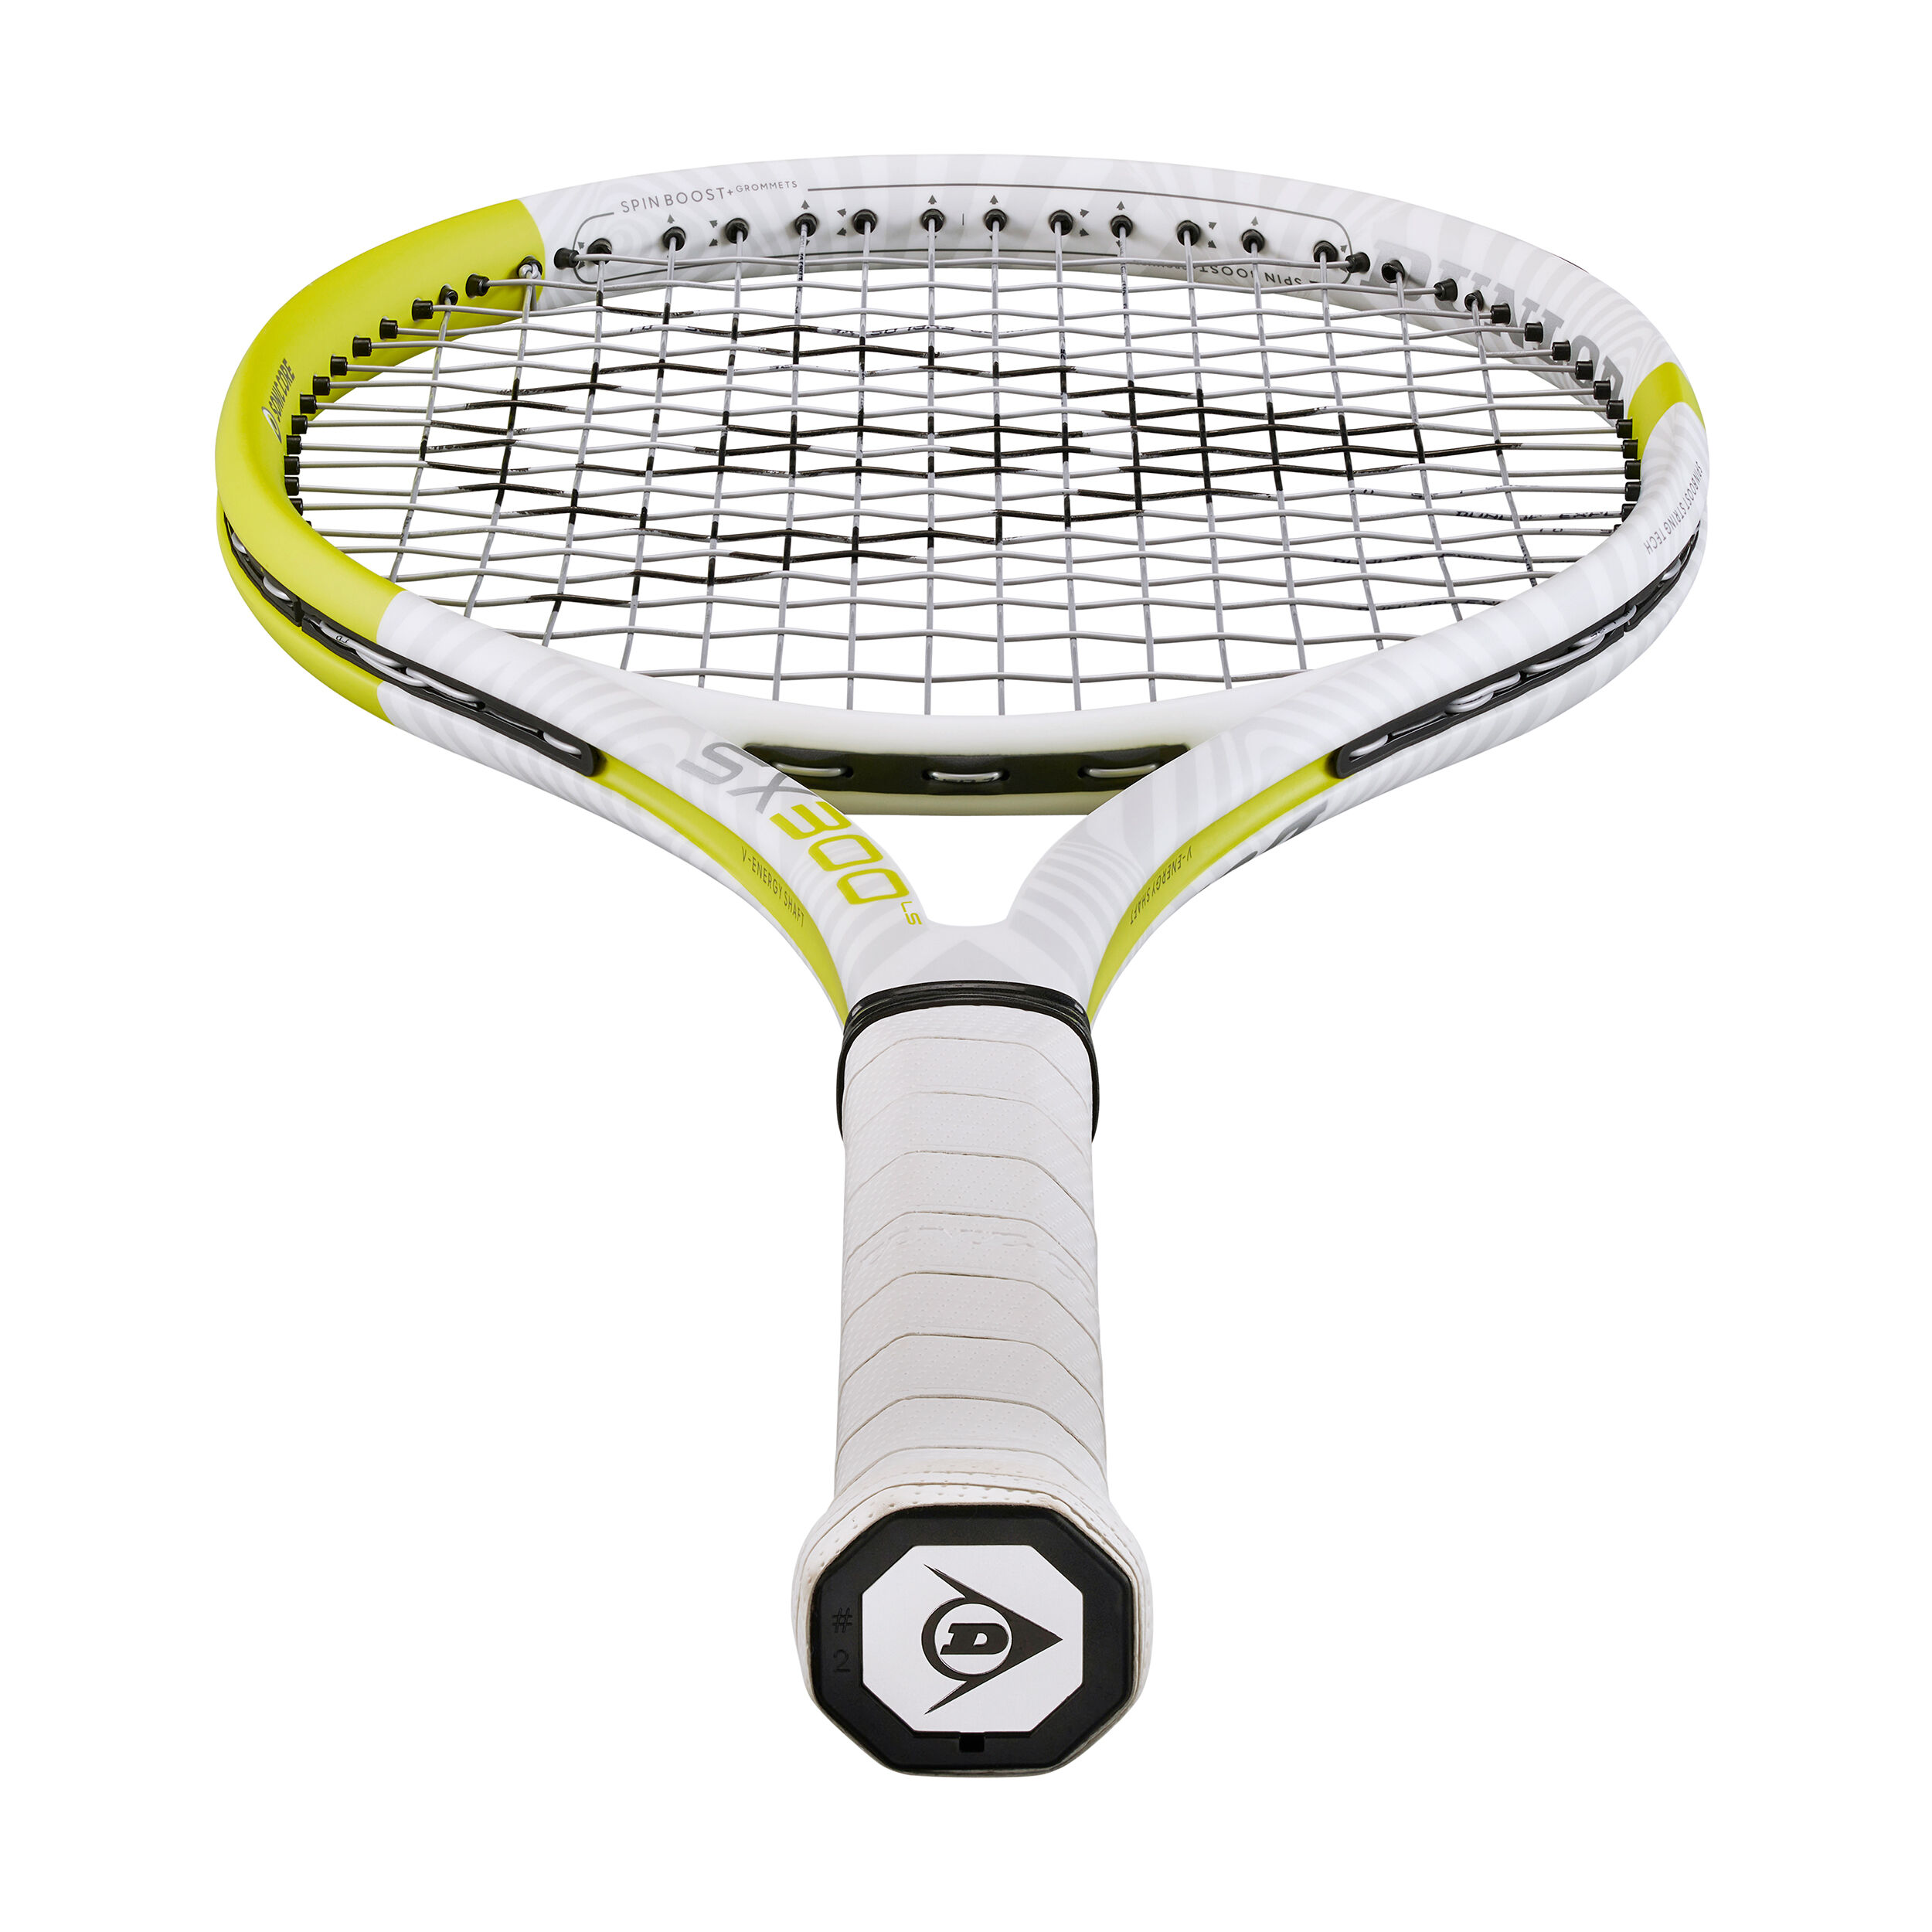 buy Dunlop SX 300 LS (Limited Edition) online | Tennis-Point